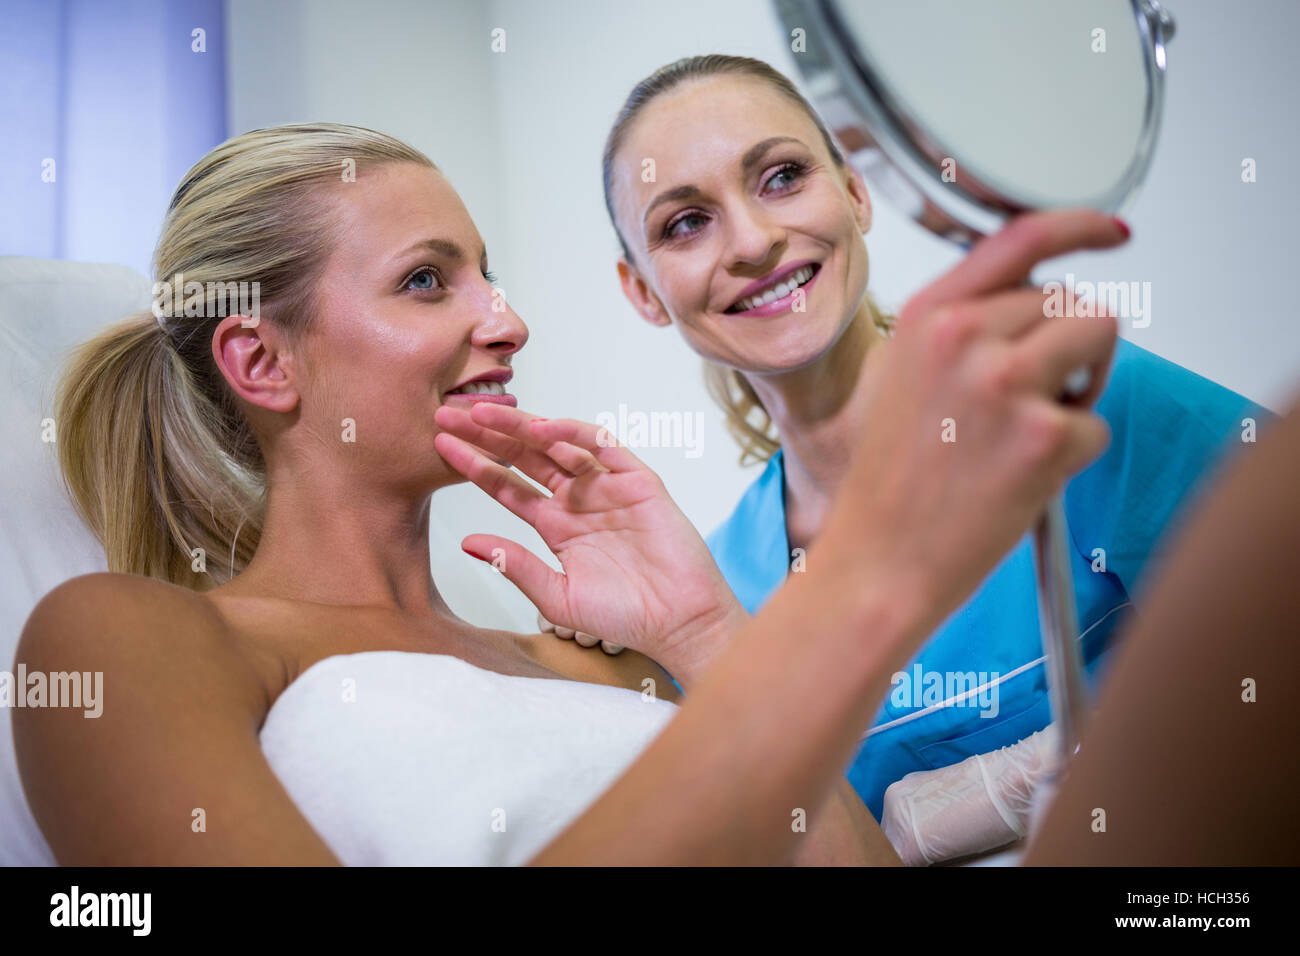 Woman checking her skin in the mirror after receiving cosmetic treatment Stock Photo